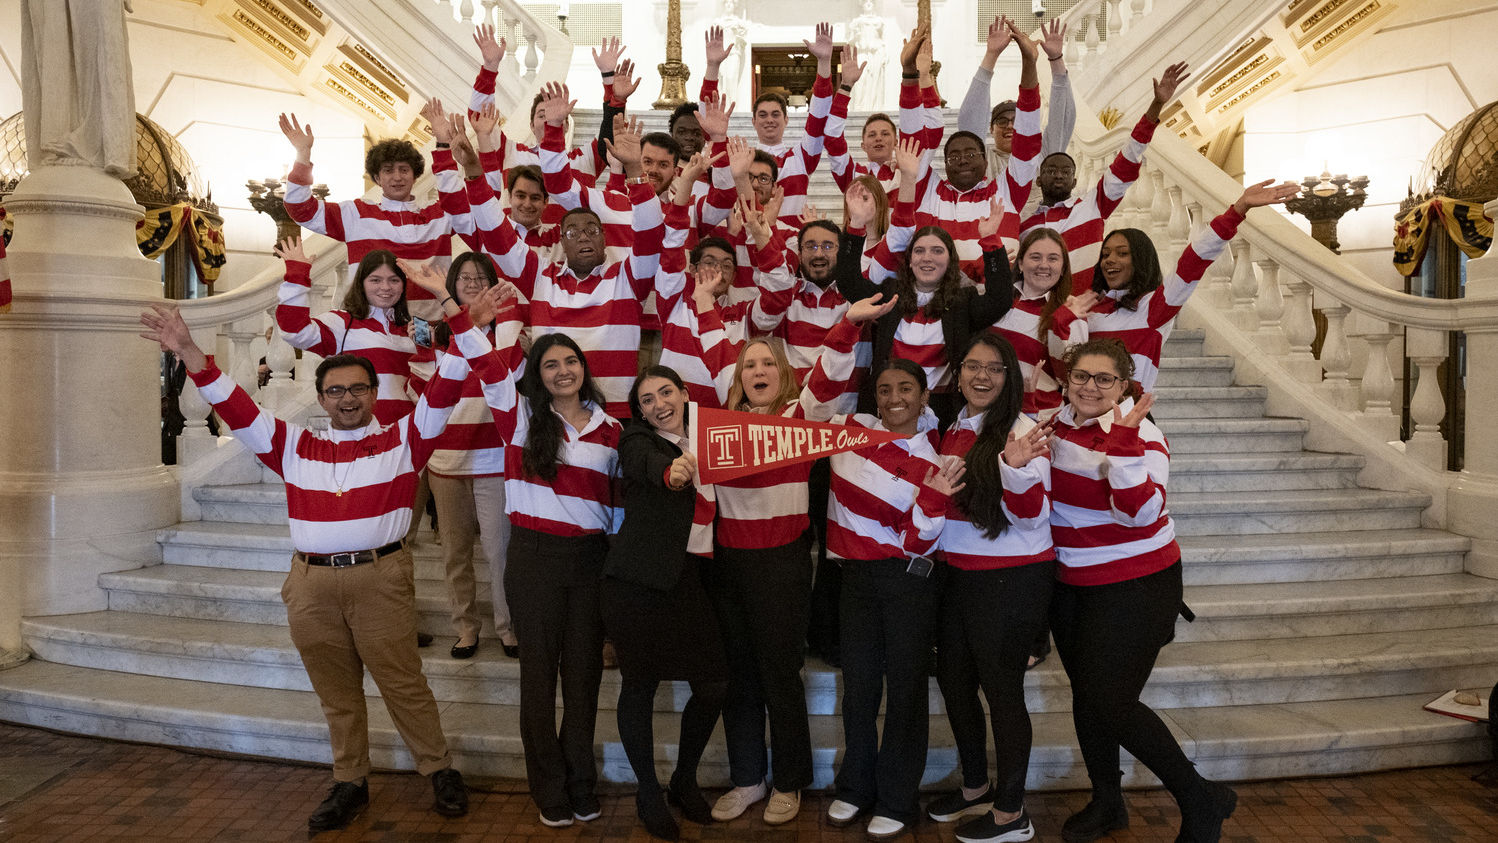 Temple students wearing red and white shirts took a group photo on the steps of the Capitol’s main rotunda. 